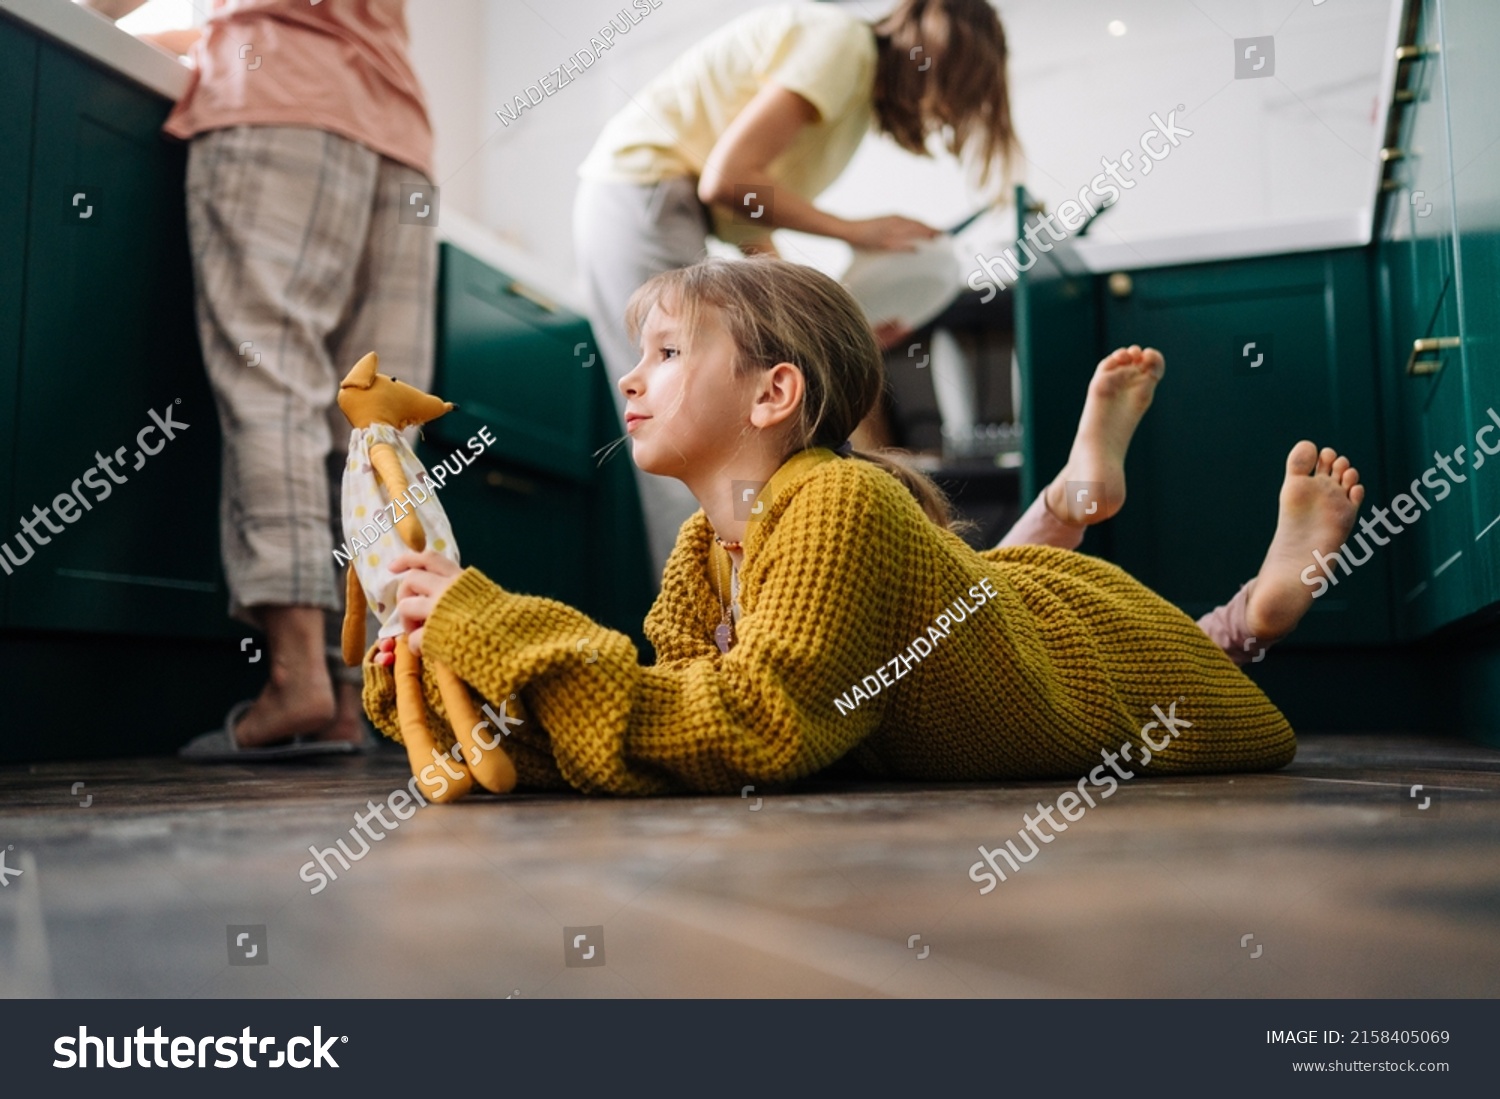 Stock Photo A Lesbian Family Is Doing Household Chores In The Kitchen And Their Daughter In A Yellow Sweater 2158405069 